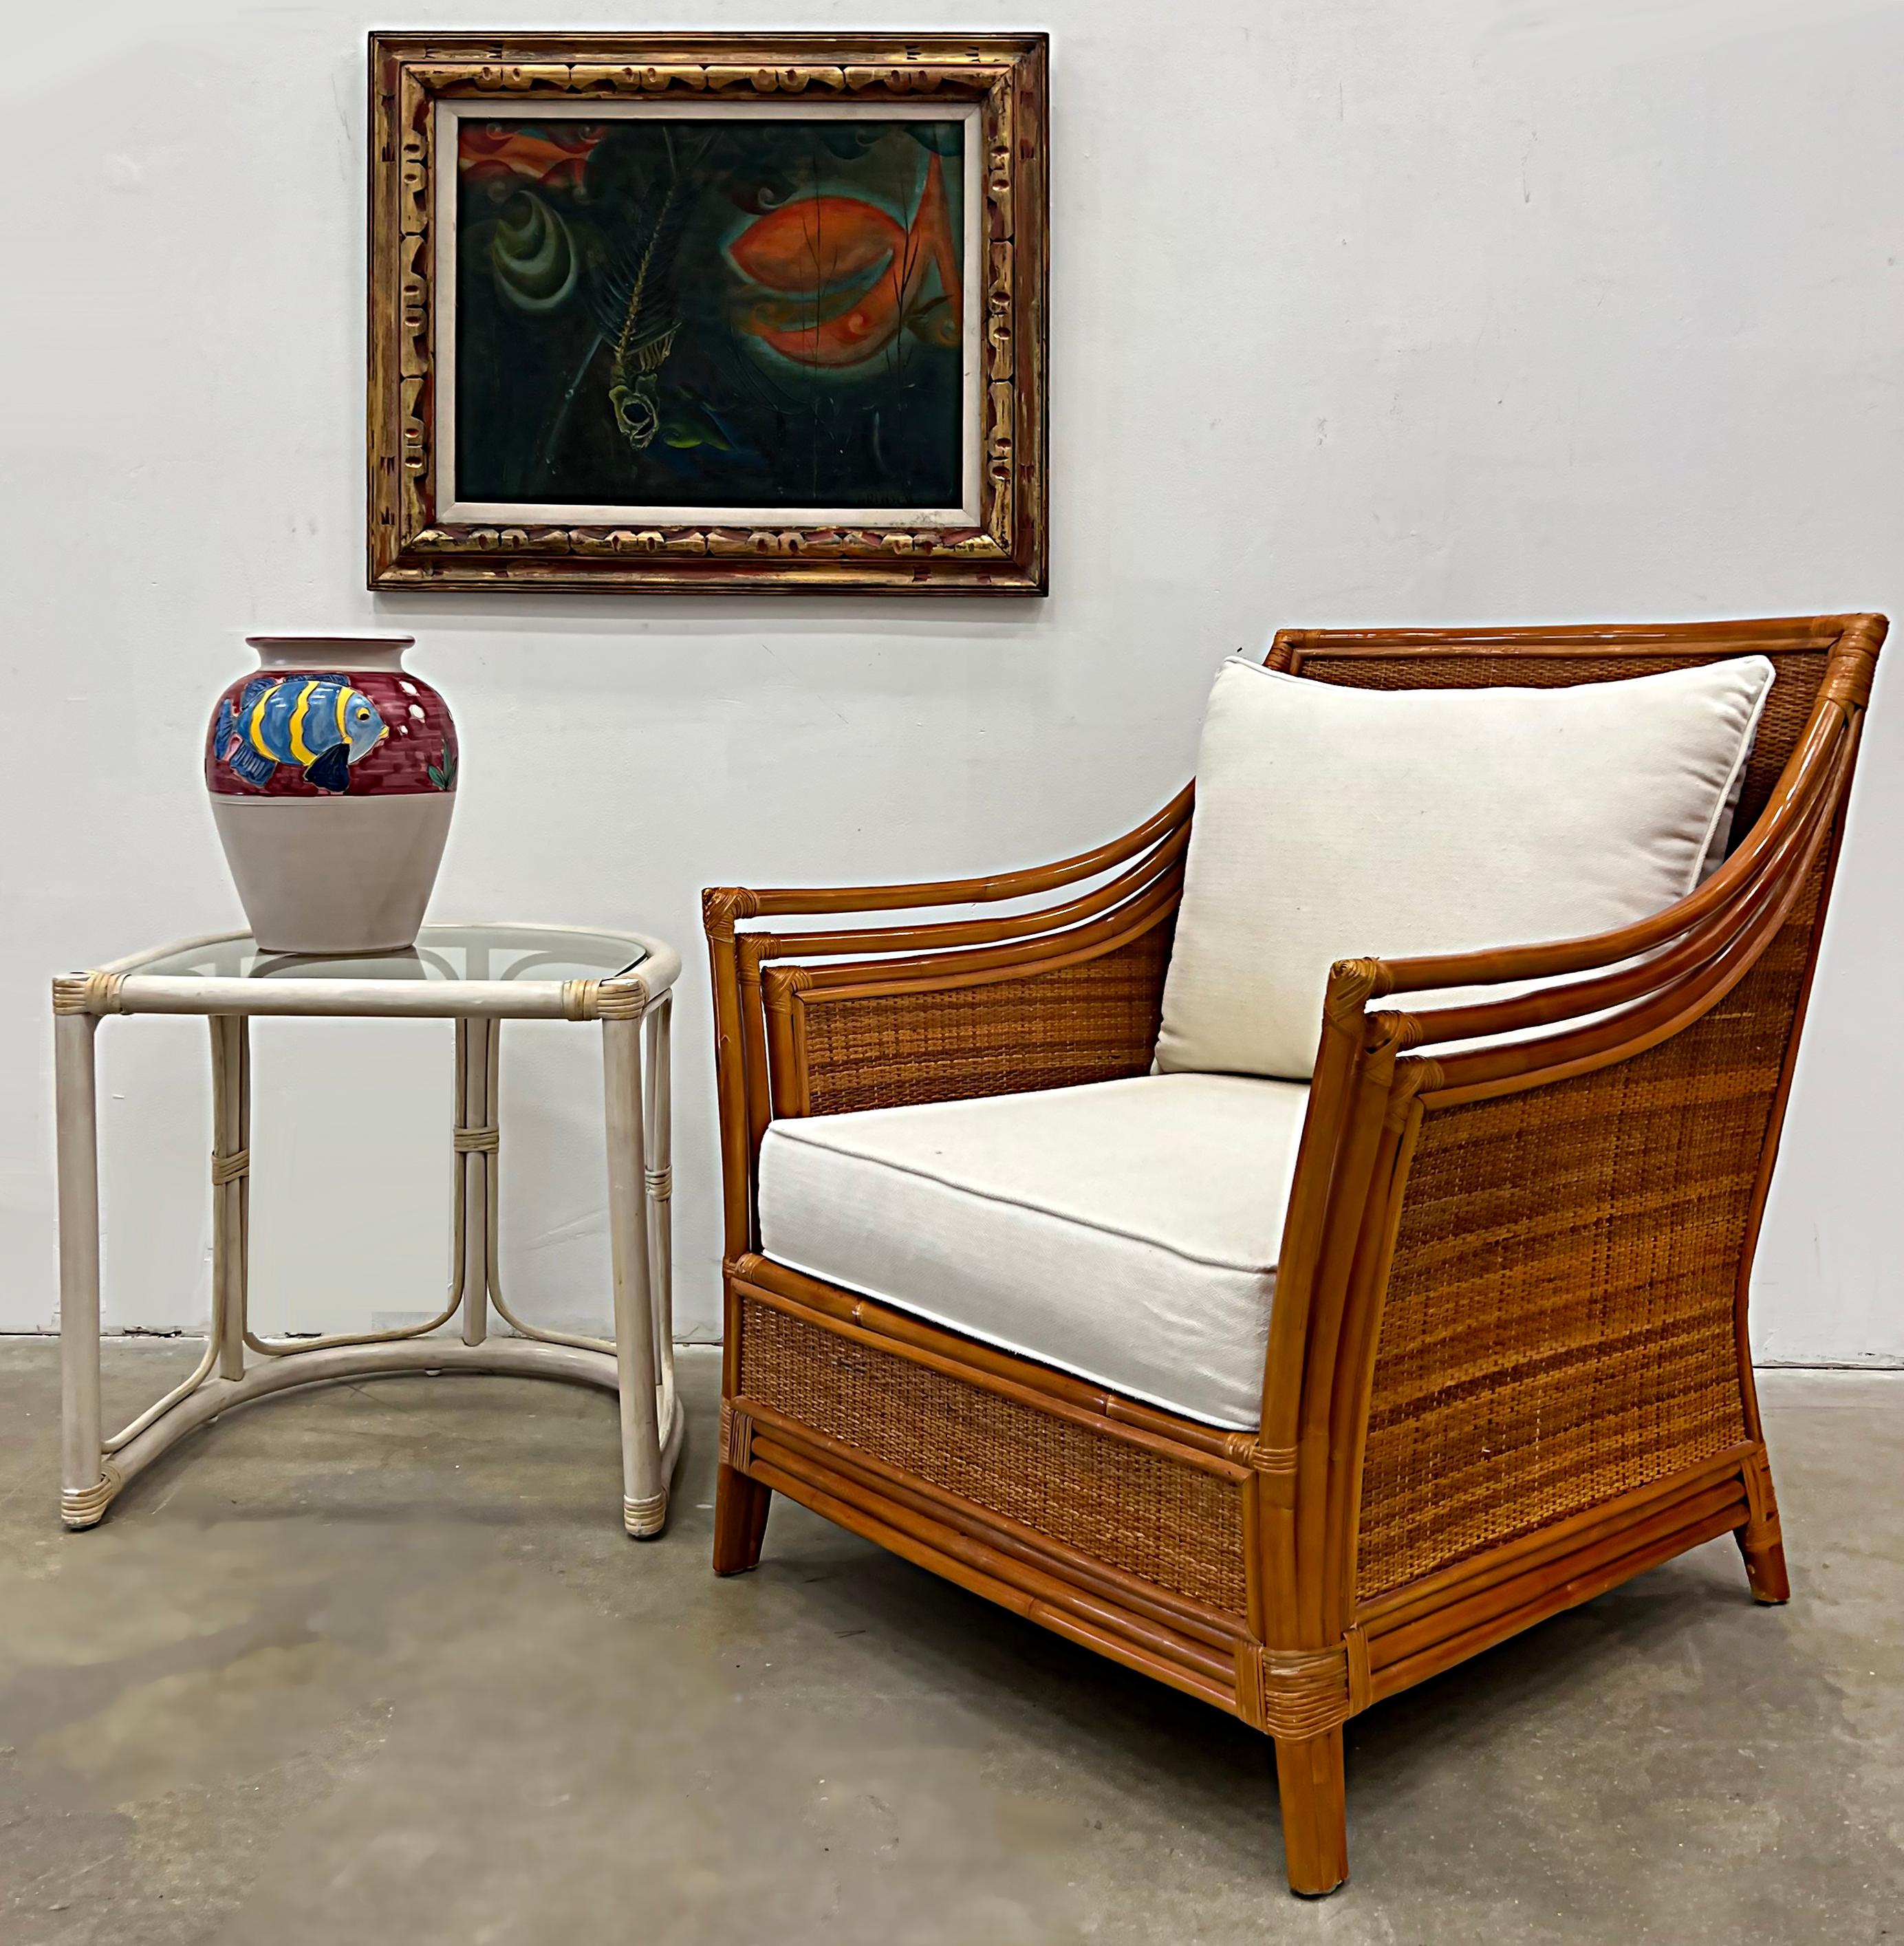 Vintage coastal rattan and wicker lounge chair 

Offered for sale is a vintage Coastal lounge chair that has a stylish rattan and woven wicker frame. The elegantly curved frame supports loose cushions and has wrapped joints. The cushions are